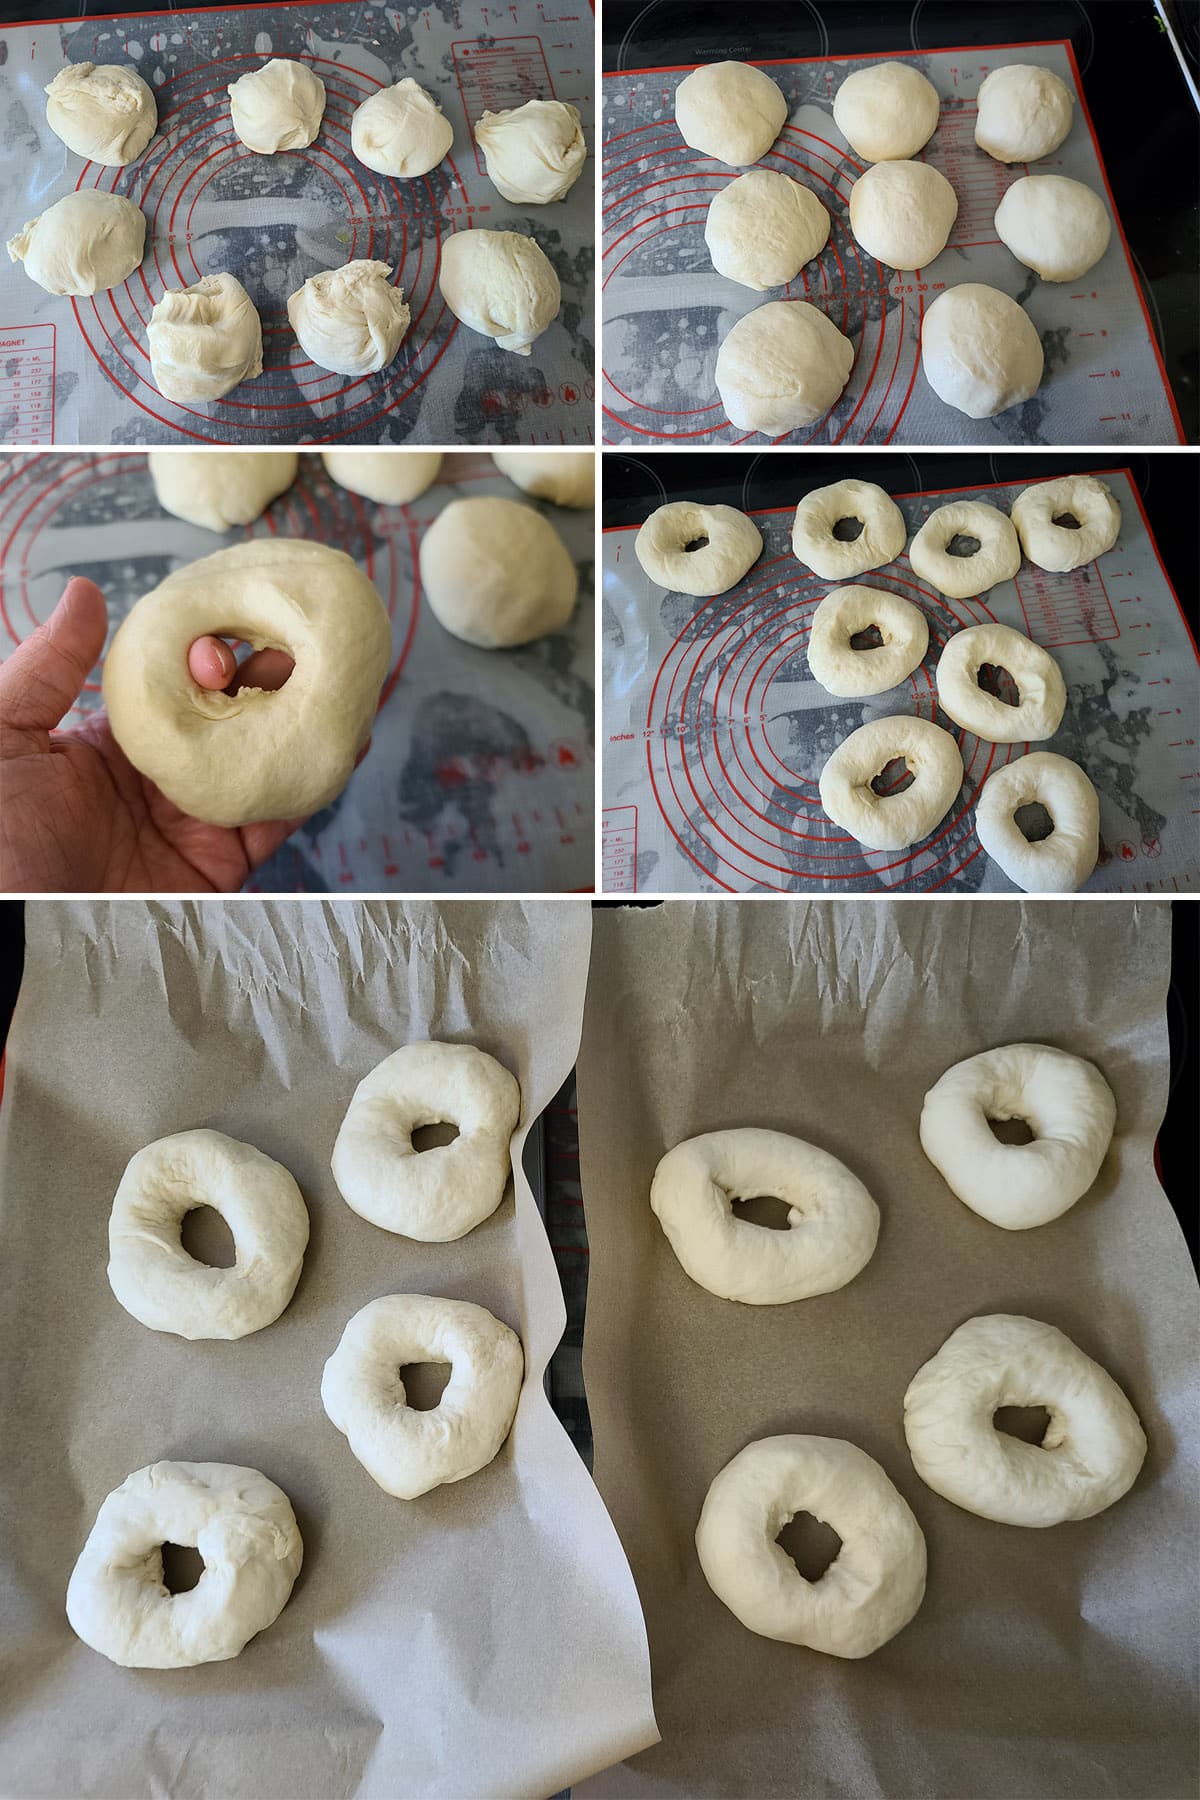 A 6 part image showing the bagel dough being divided and formed into rings.